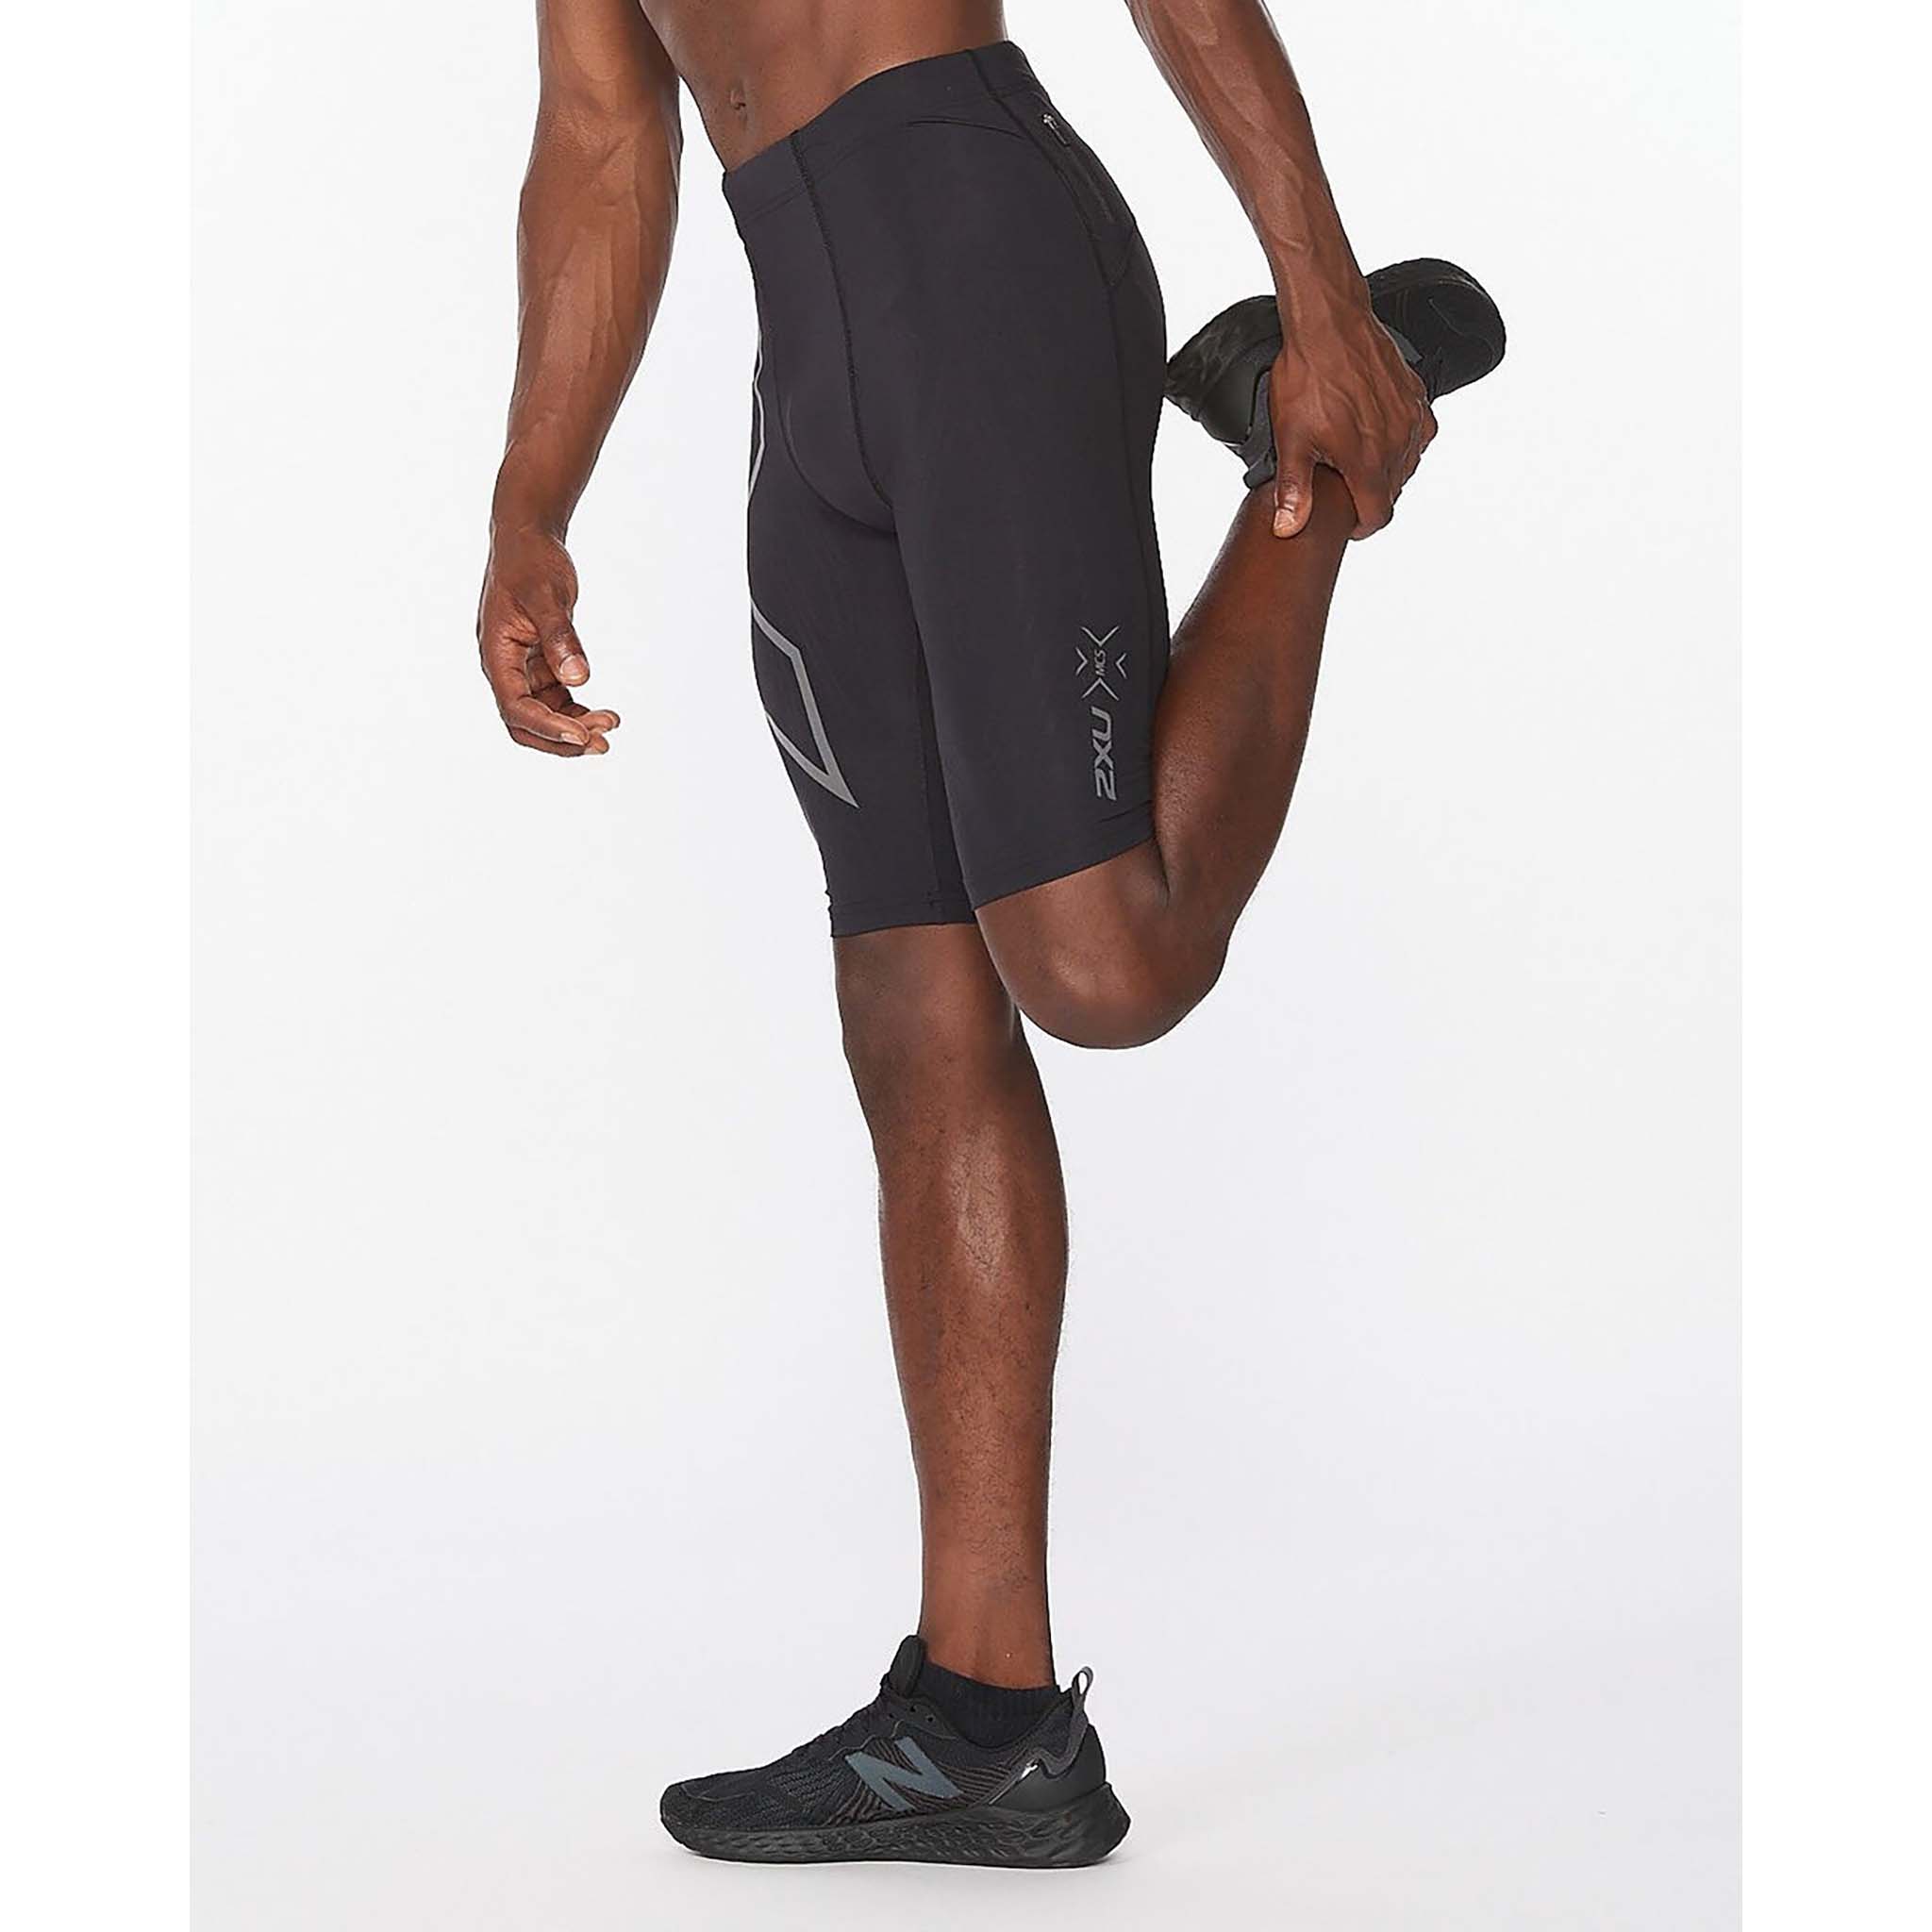 2XU Men's Light Speed Compression Shorts for Running and Active